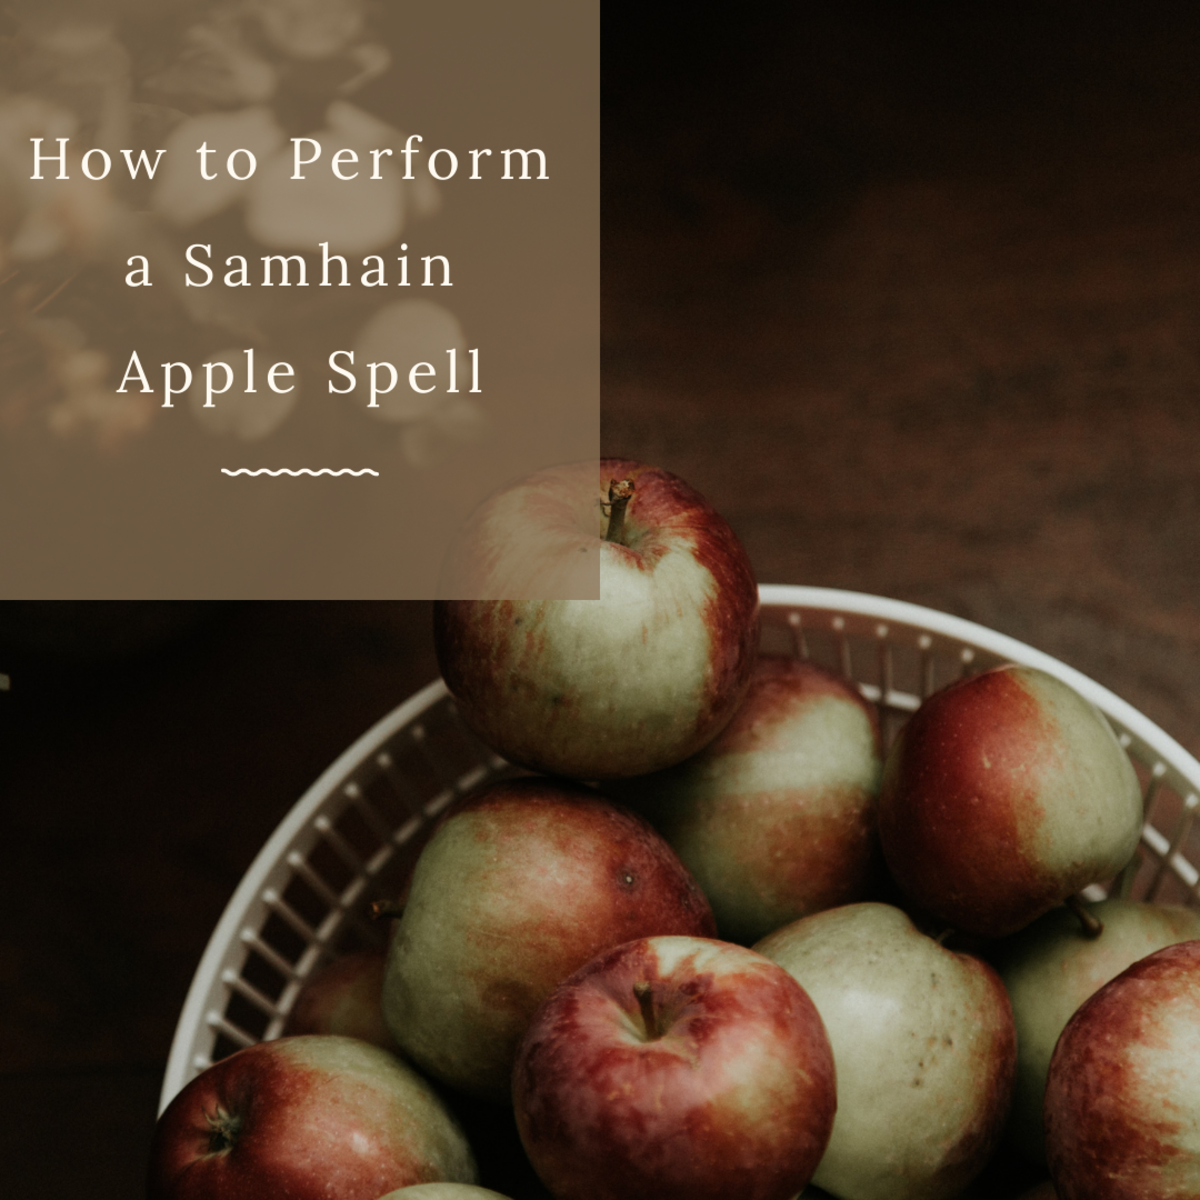 Samhain is the perfect time of year for this simple form of apple magic.